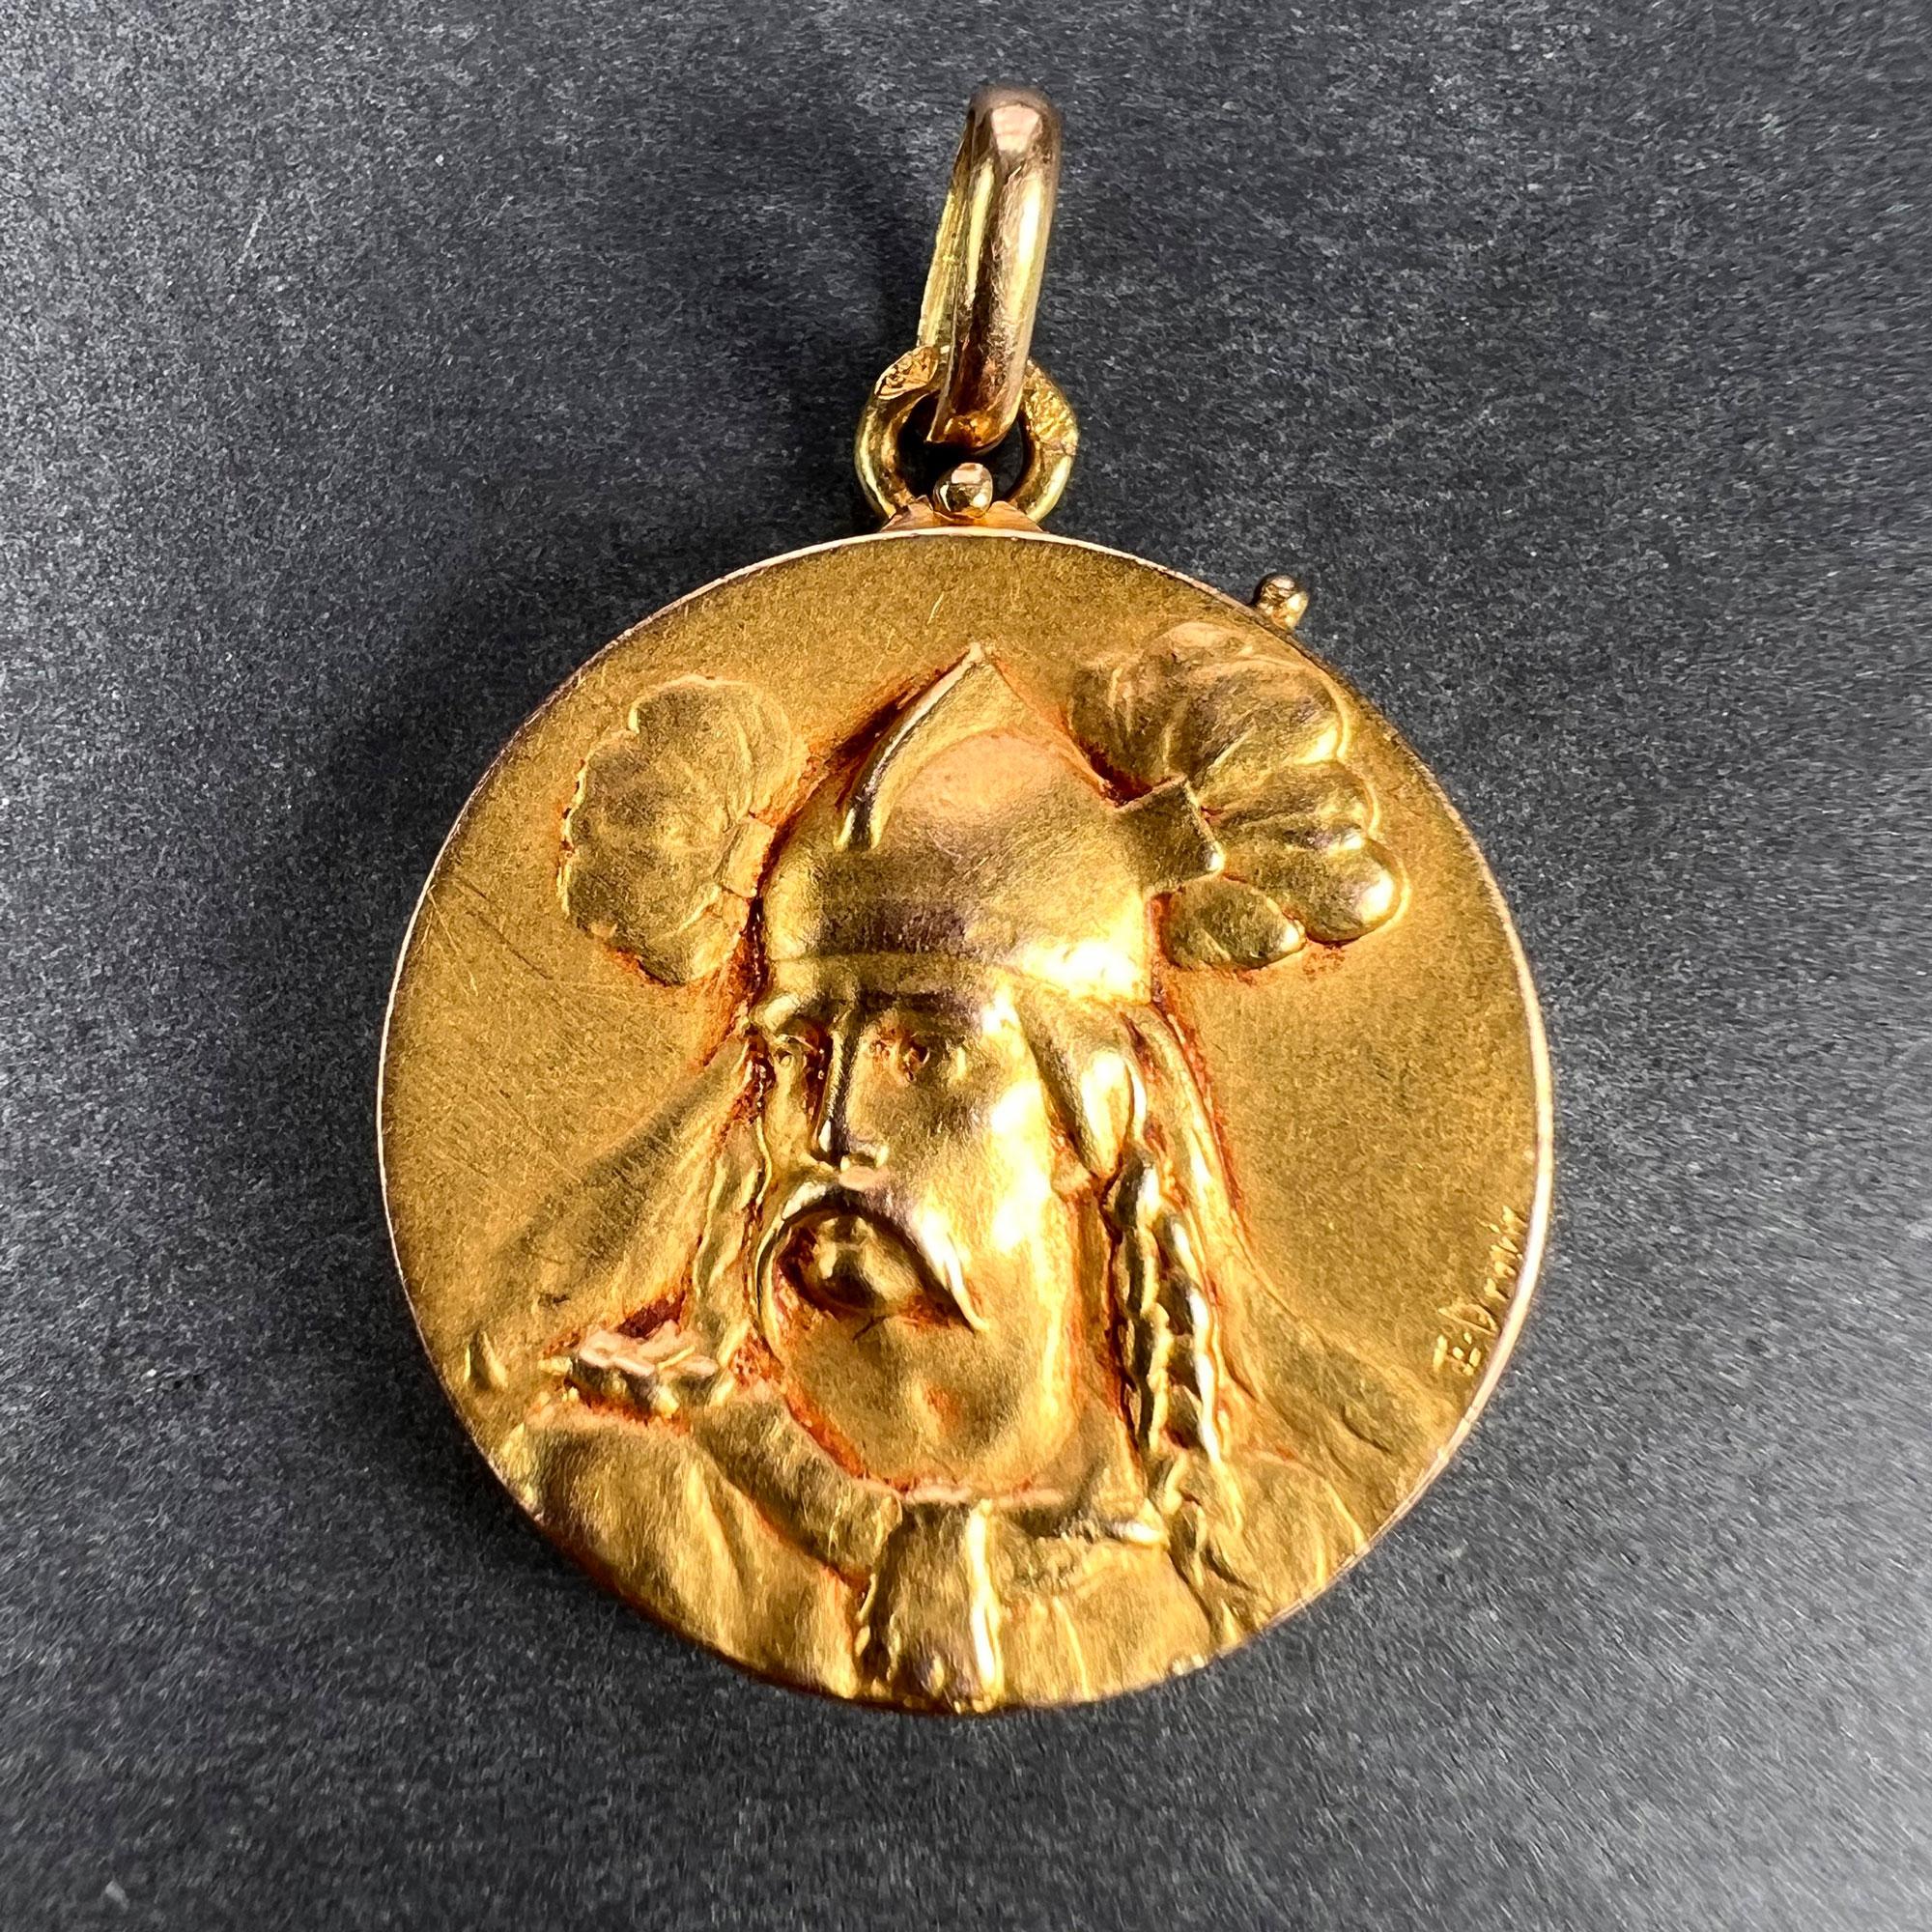 A French 18 karat (18K) yellow gold pendant locket depicting Vercingetorix the Gallian leader, to one side and a suit of armour, weapons and a flag to the other. Signed E. Dropsy. Stamped with the horse’s head  mark for 18 karat gold and French